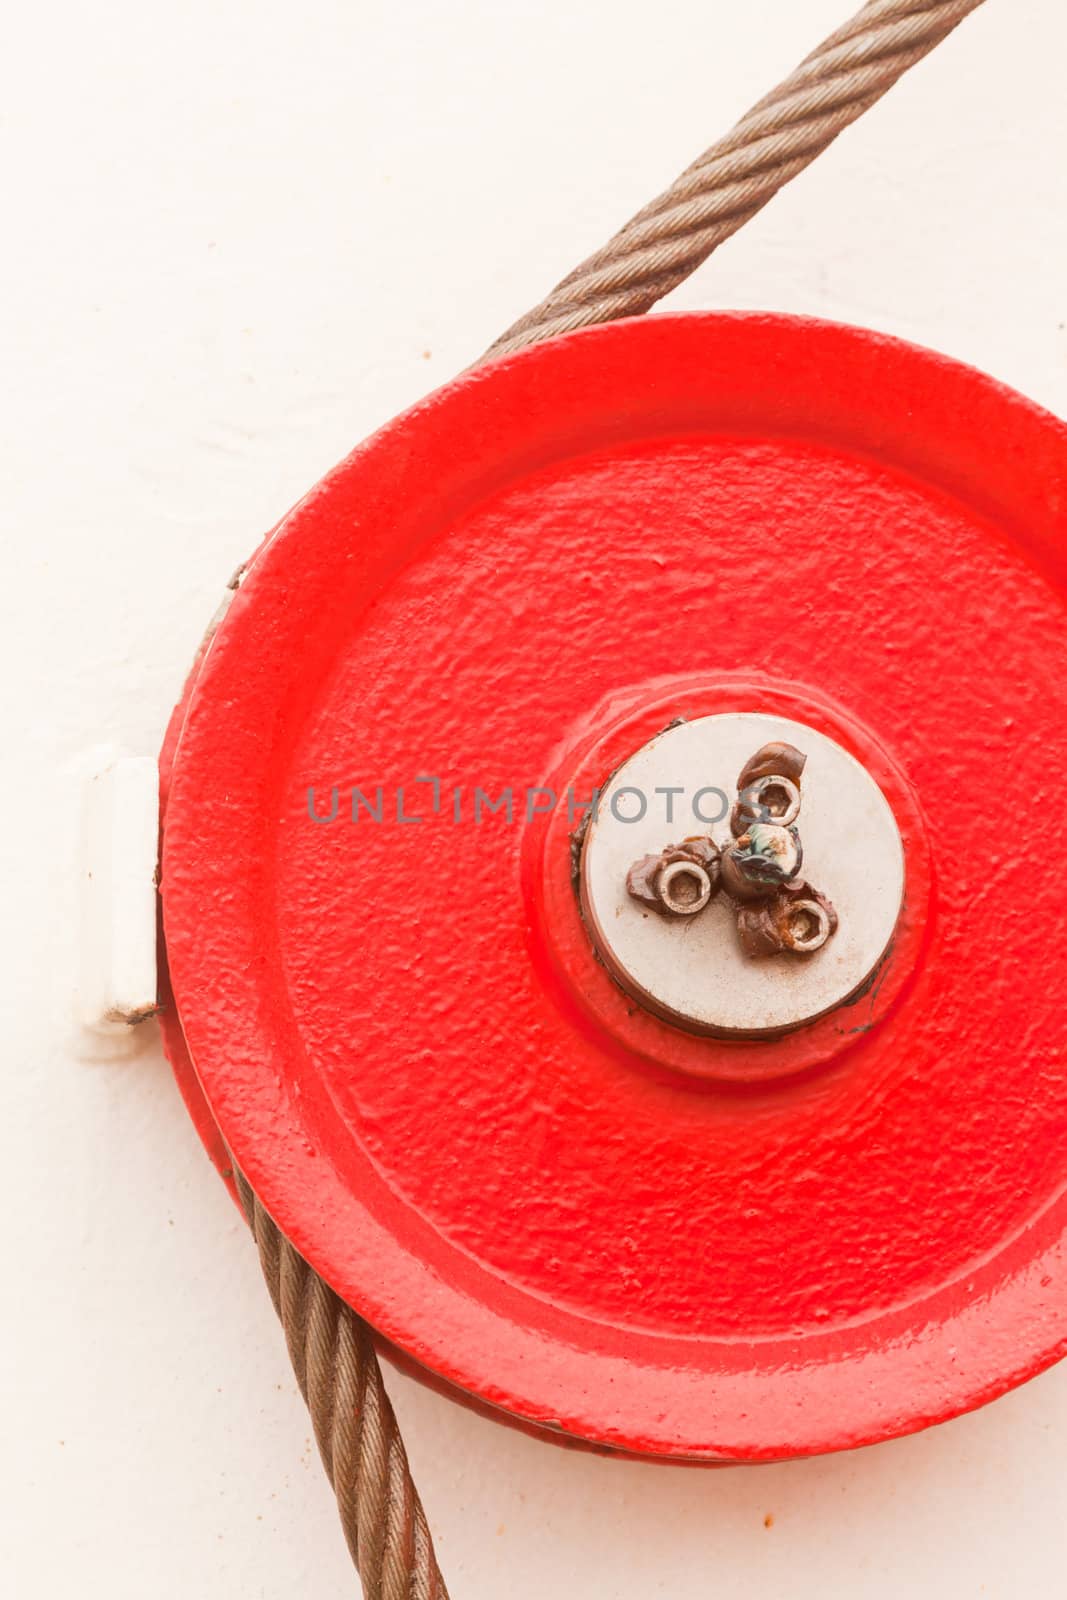 The red fairlead pulley has a grooved rim and is used as a guide around which the cable can pass in order to change direction of the pull on the load